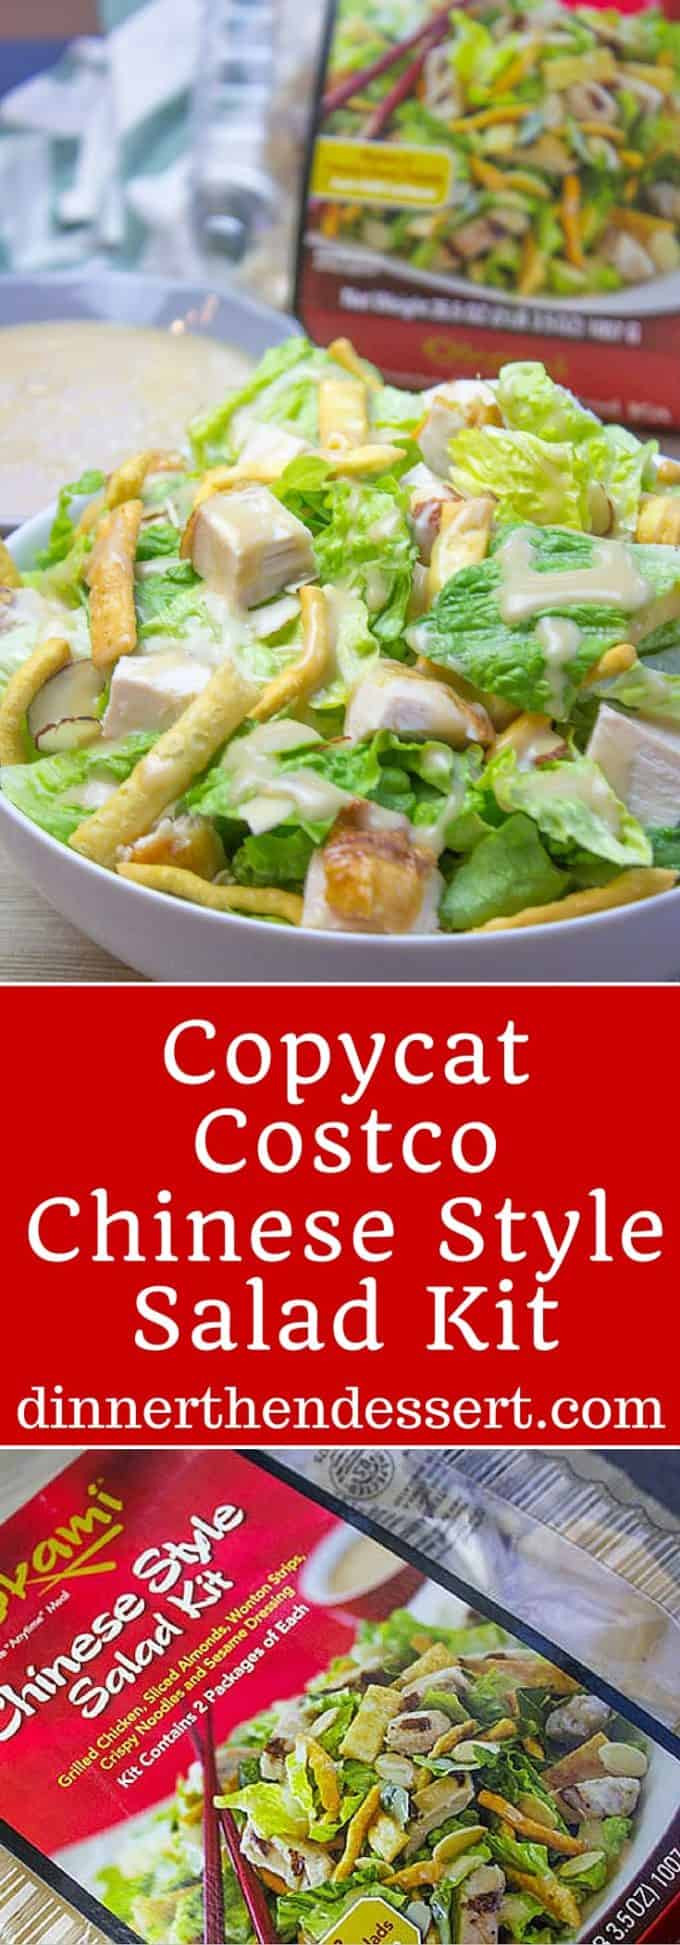 Costco Chicken Salad Nutrition
 Costco Chinese Style Salad Kit Copycat Dinner then